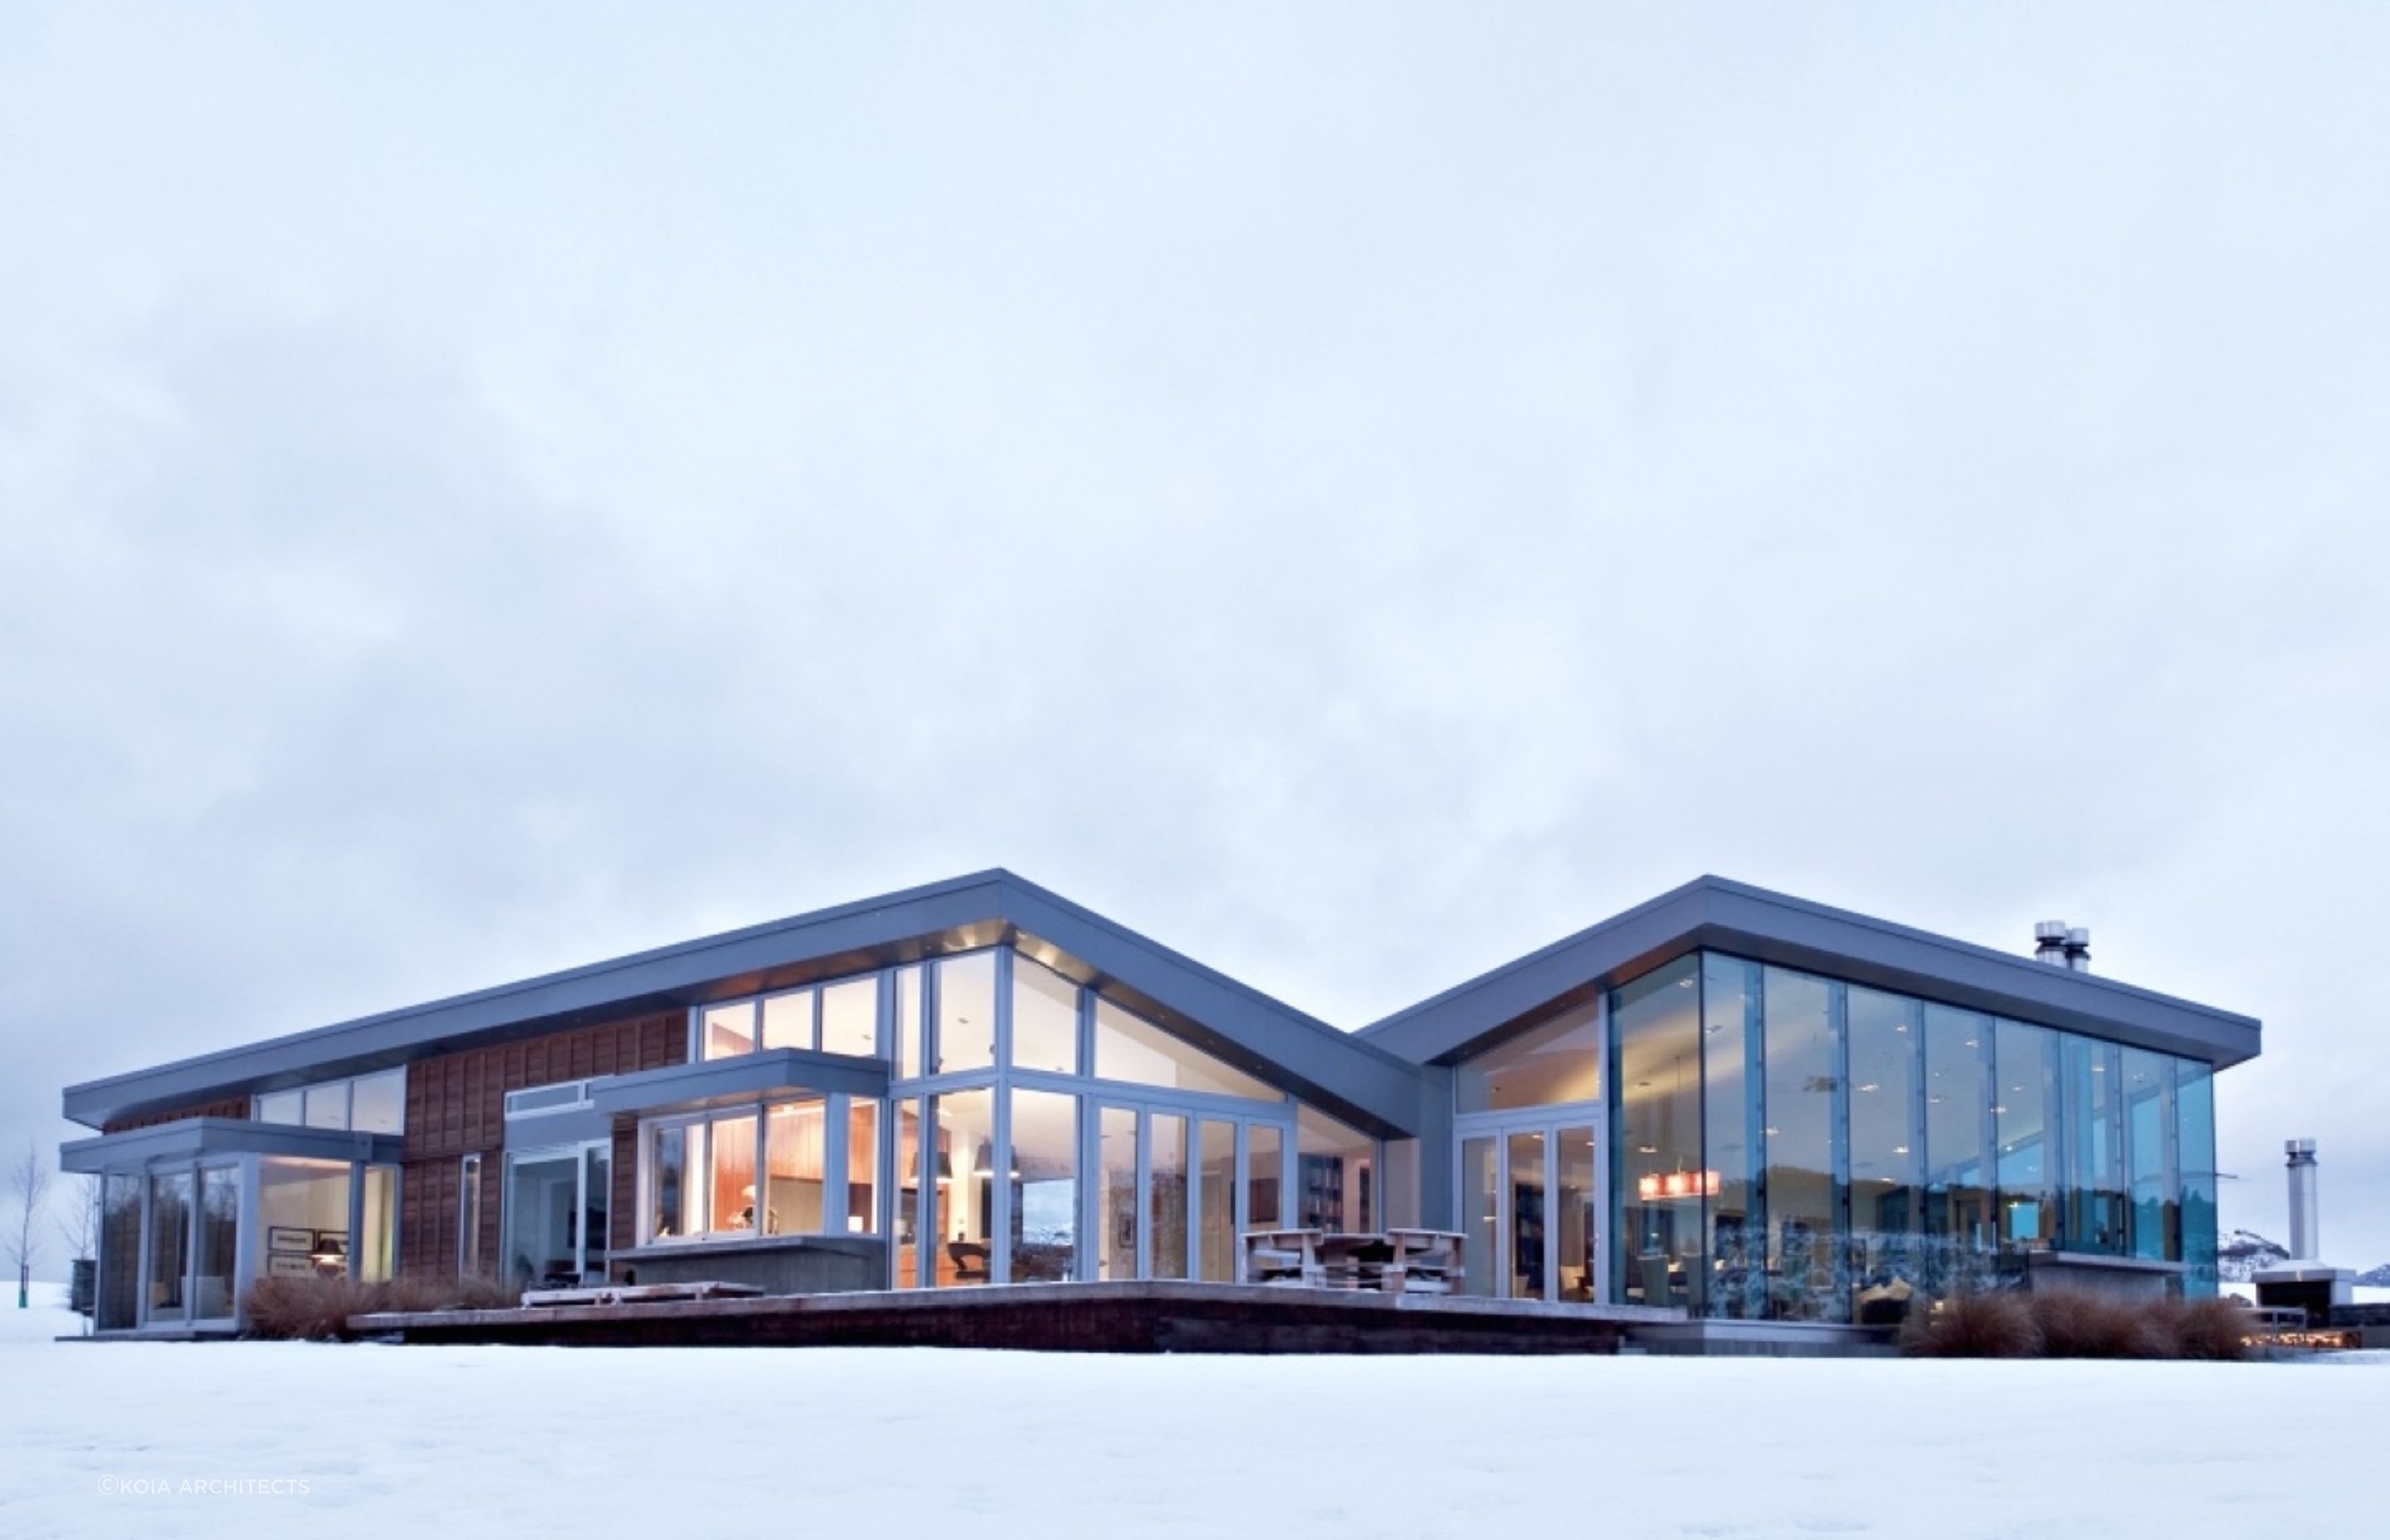 An exquisite alpine retreat for a wintry break with Dalefield House.